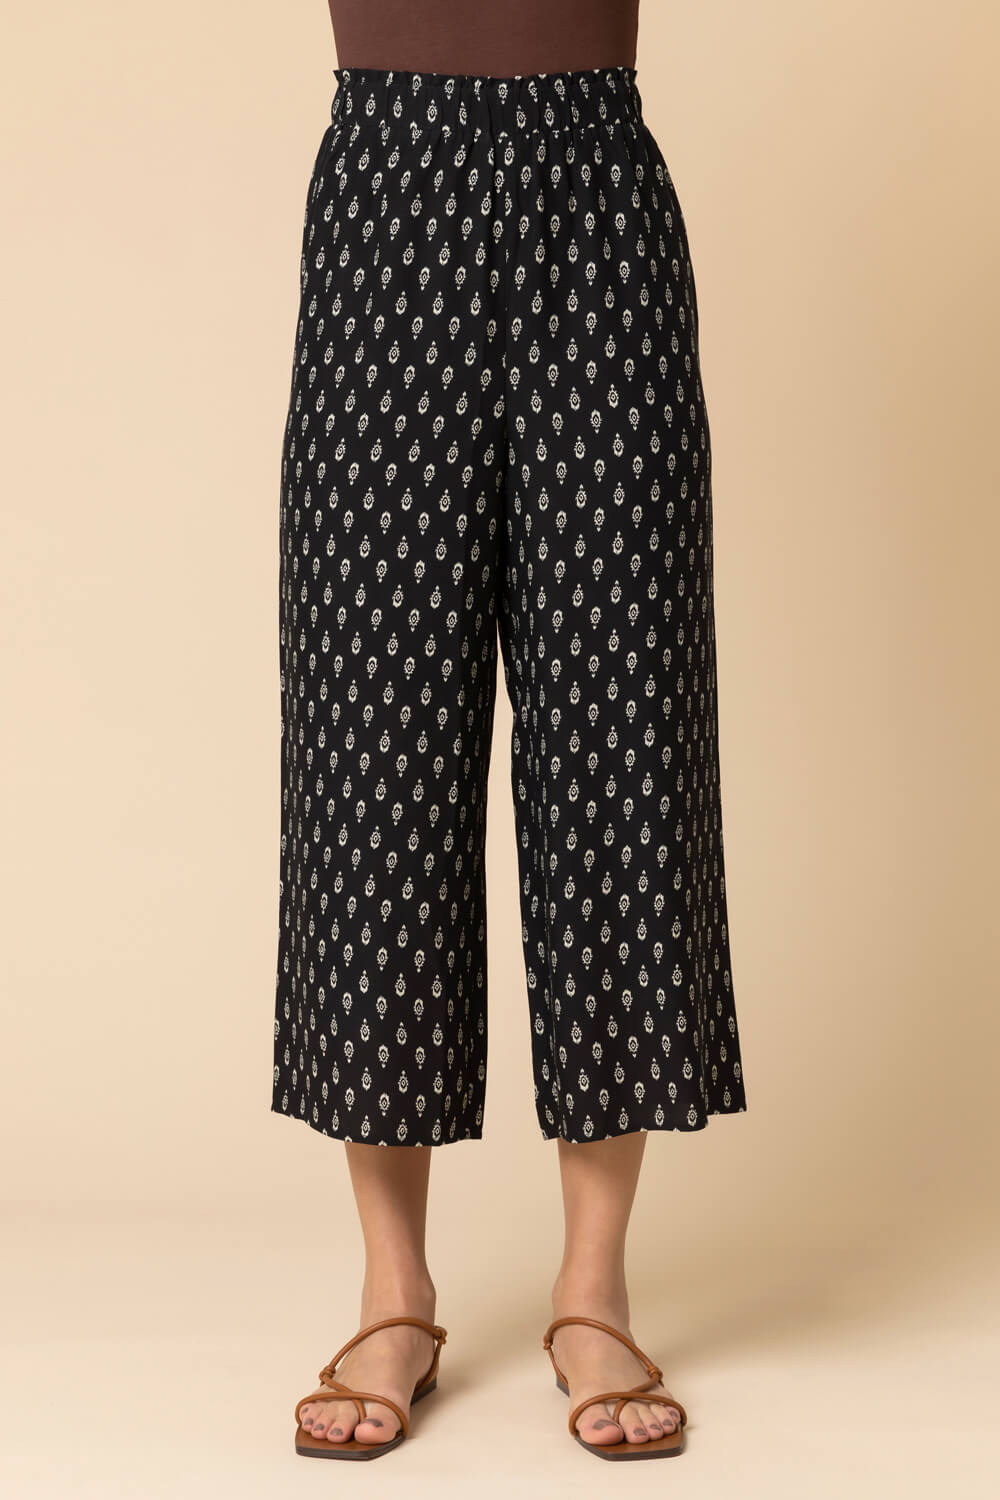 Black Paisley Print Culotte Trousers, Image 3 of 4